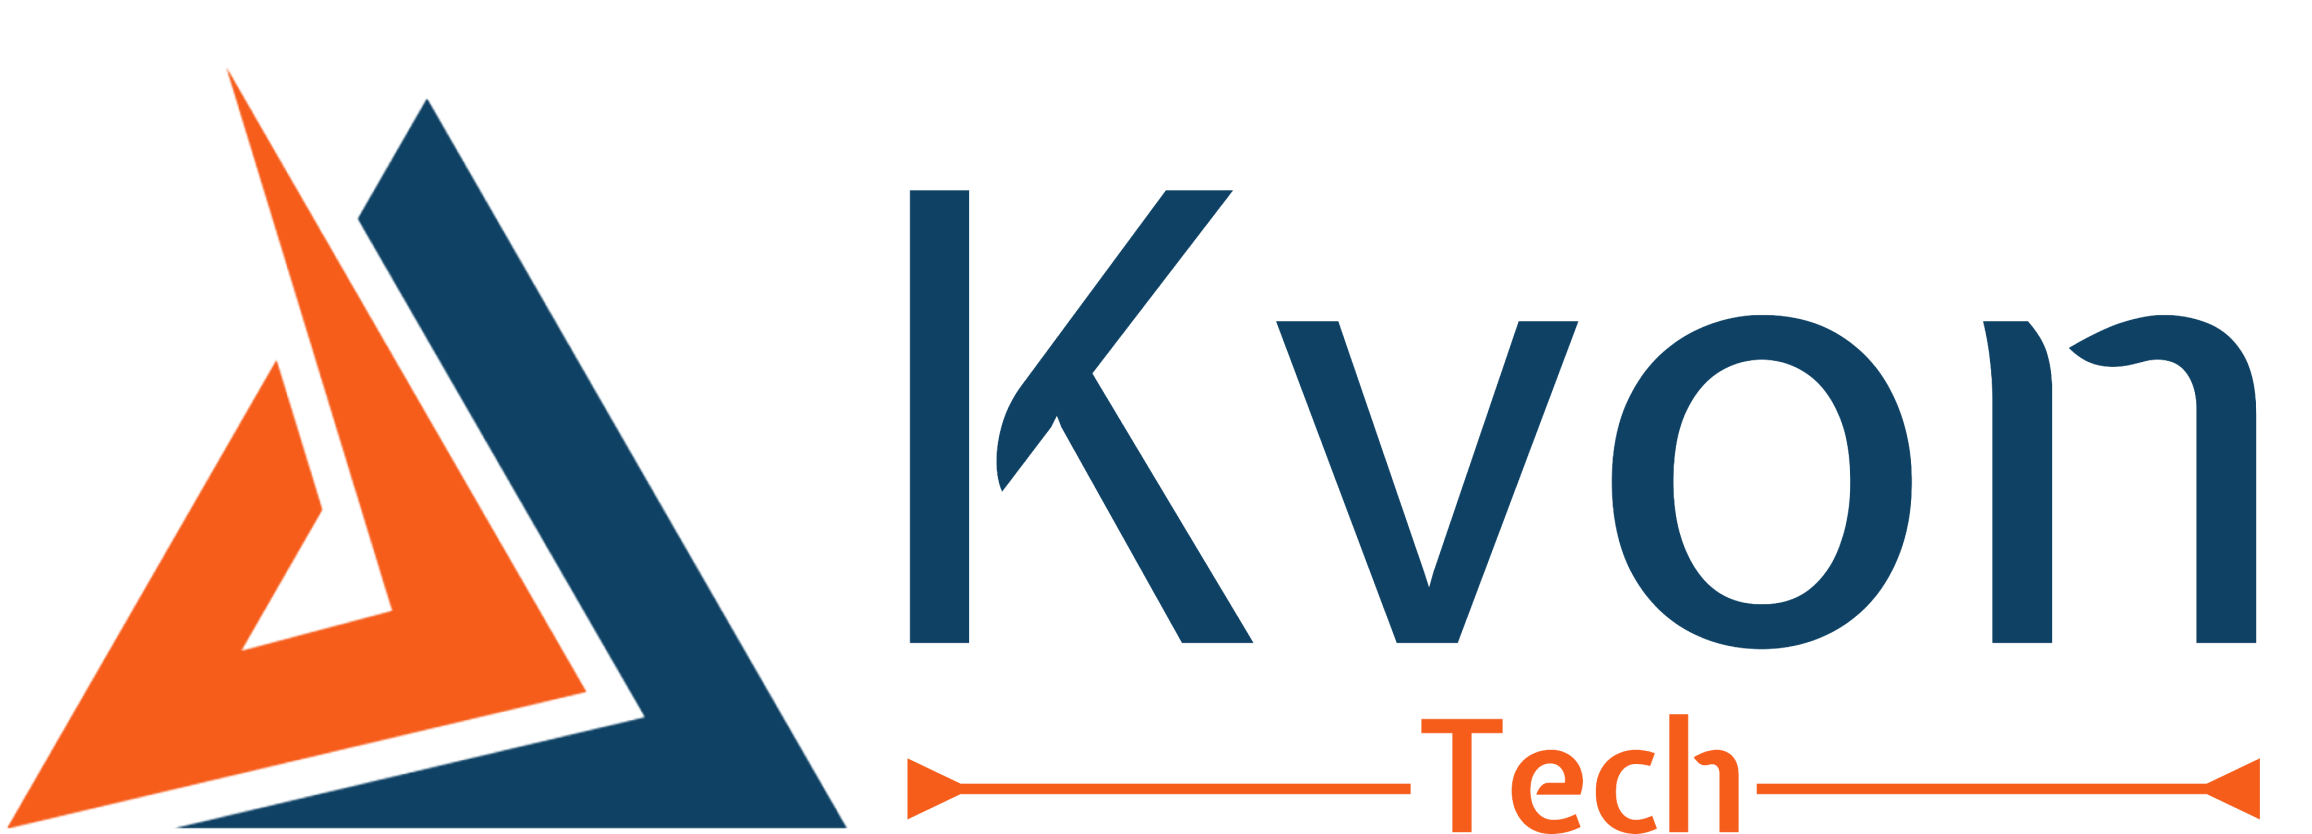 KvonTech Consultancy Services Private Limited